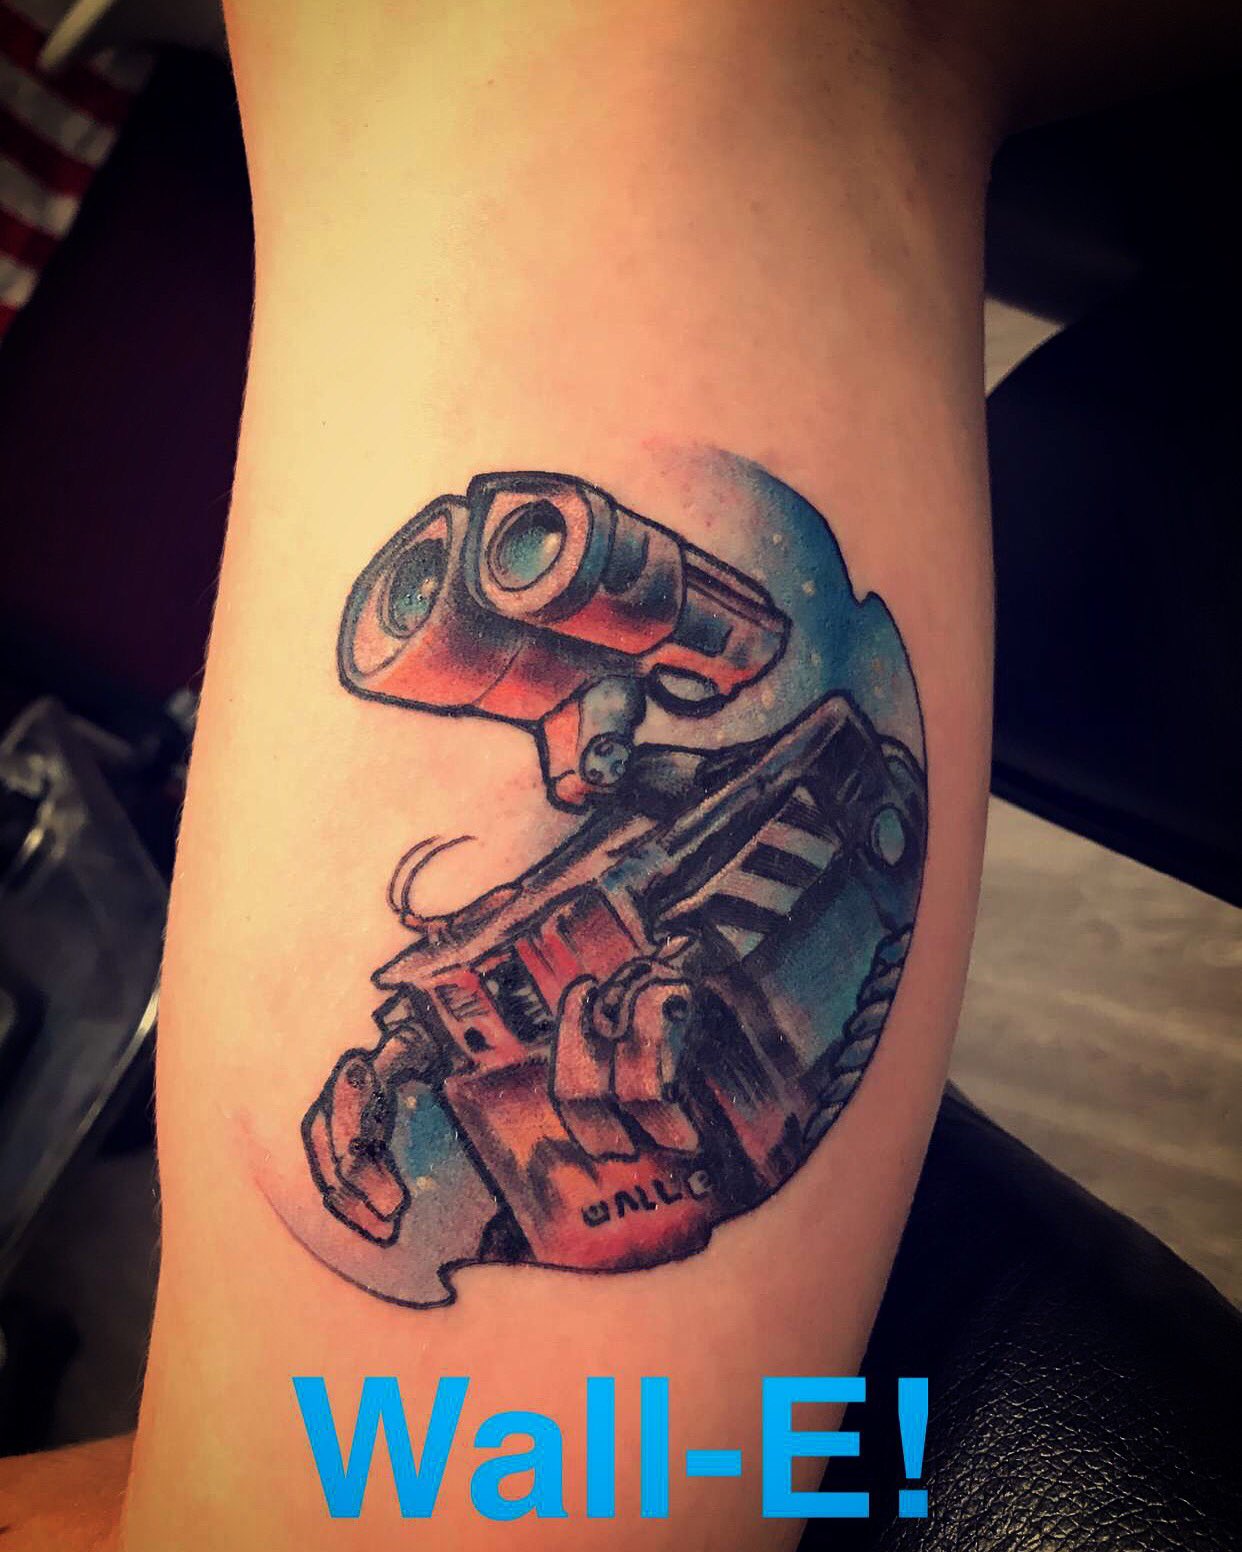 WallE and Eve tattoo one more session to finish them walle pixar    TikTok